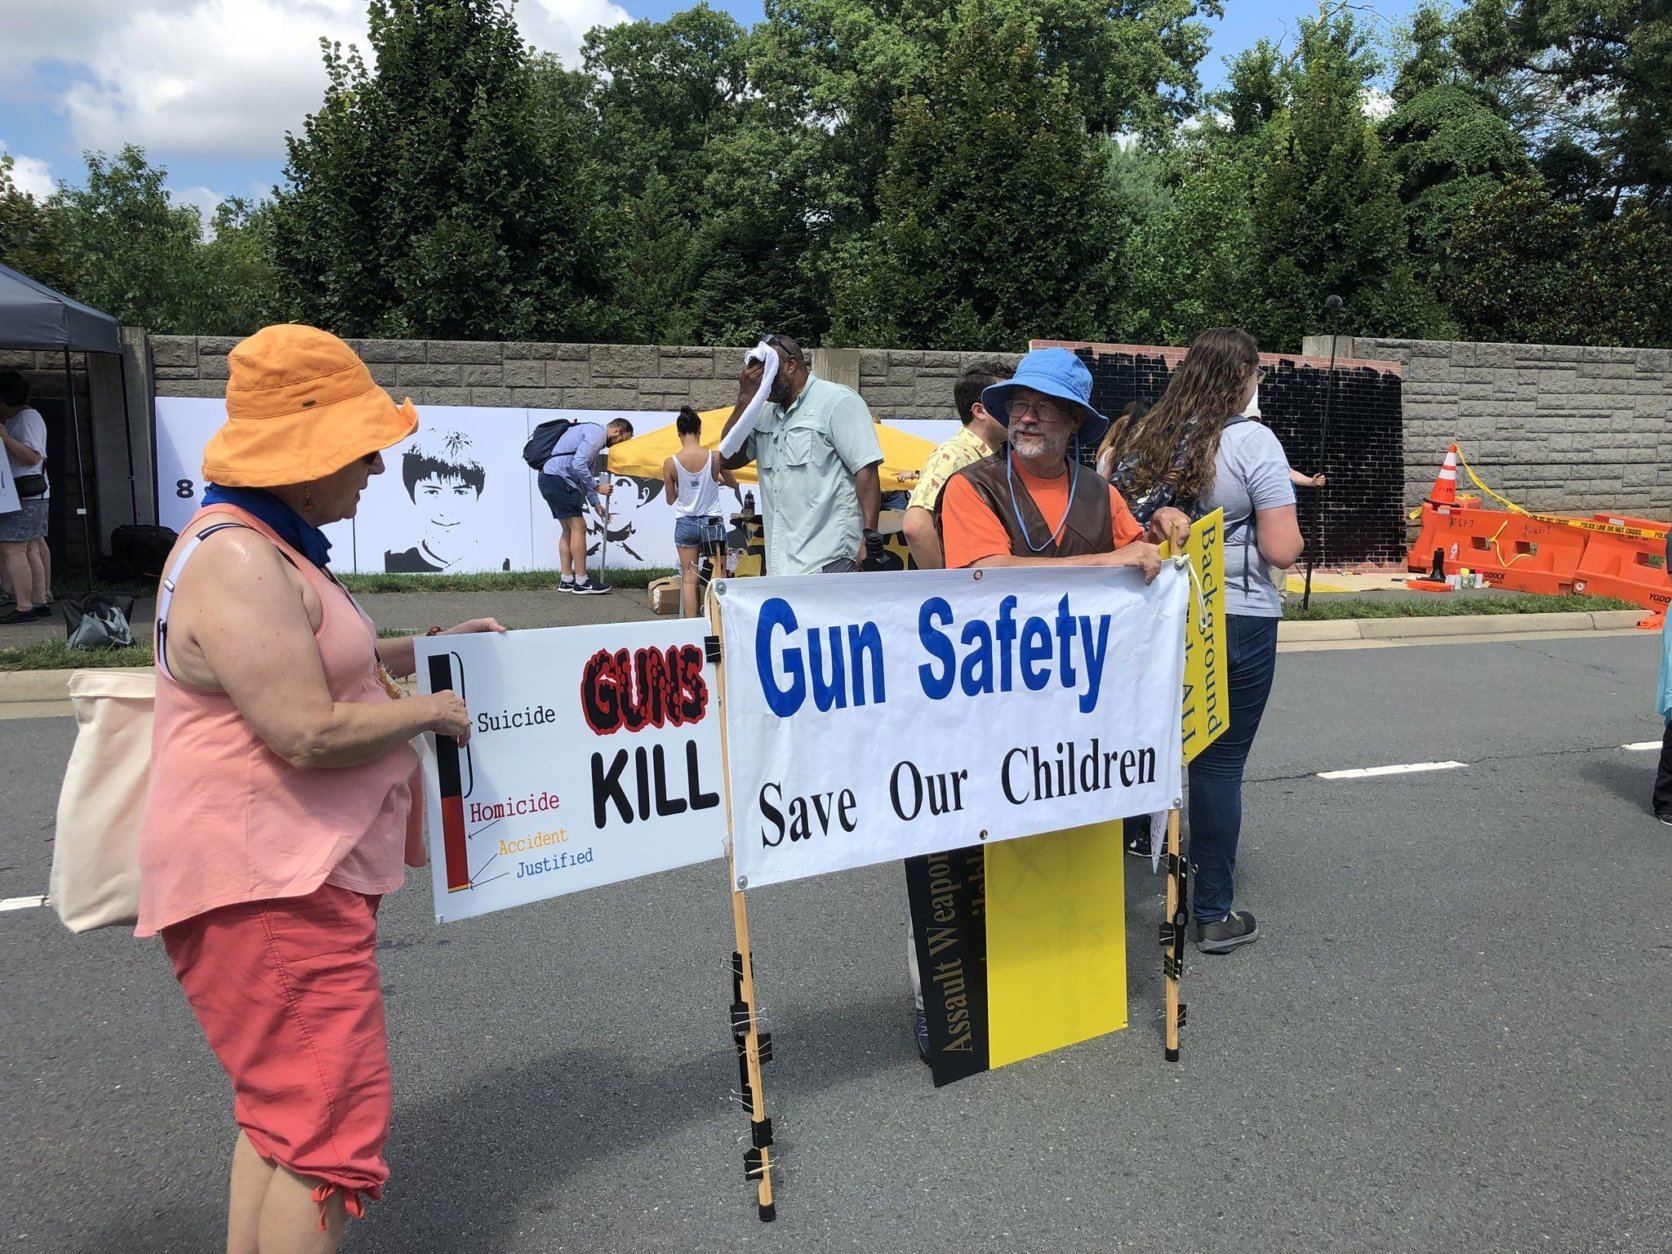 Protesters holding banners on Waples Mill Road, near the NRA's headquaters in Fairfax. (WTOP/Melissa Howell)